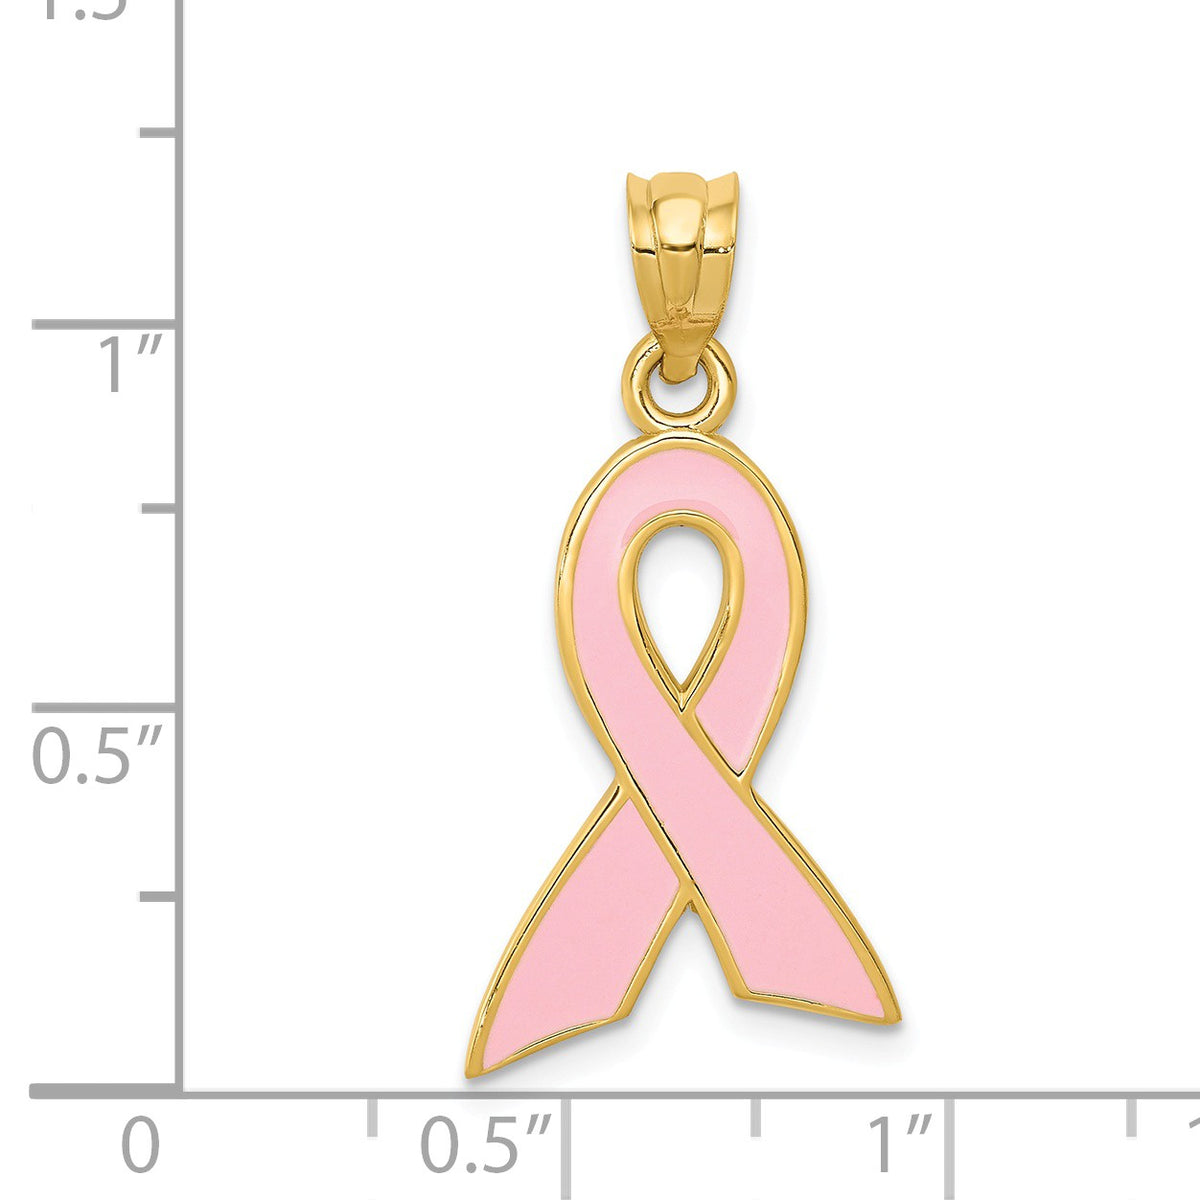 Alternate view of the 14k Yellow Gold &amp; Pink Enamel Awareness Ribbon Pendant by The Black Bow Jewelry Co.